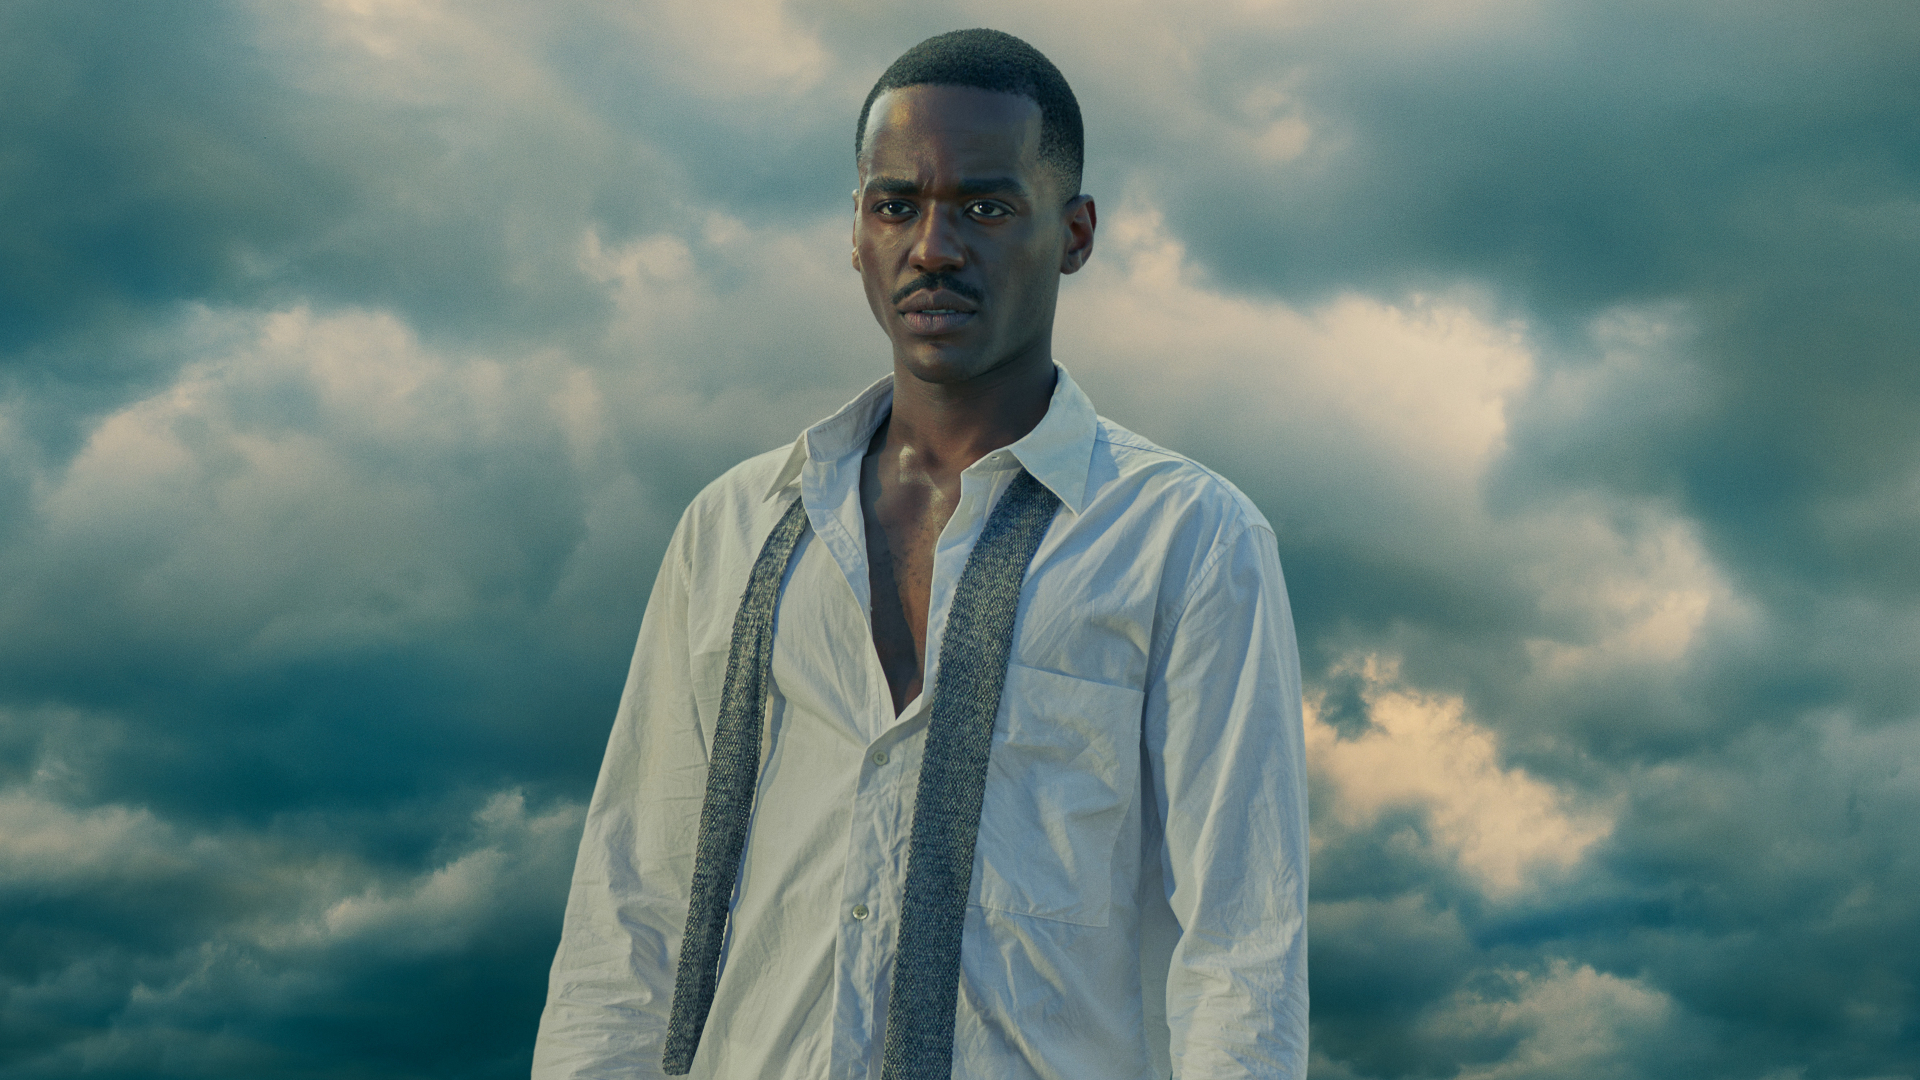 Ncuti Gatwa stands in an unbottoned white shirt with a tie in Doctor Who